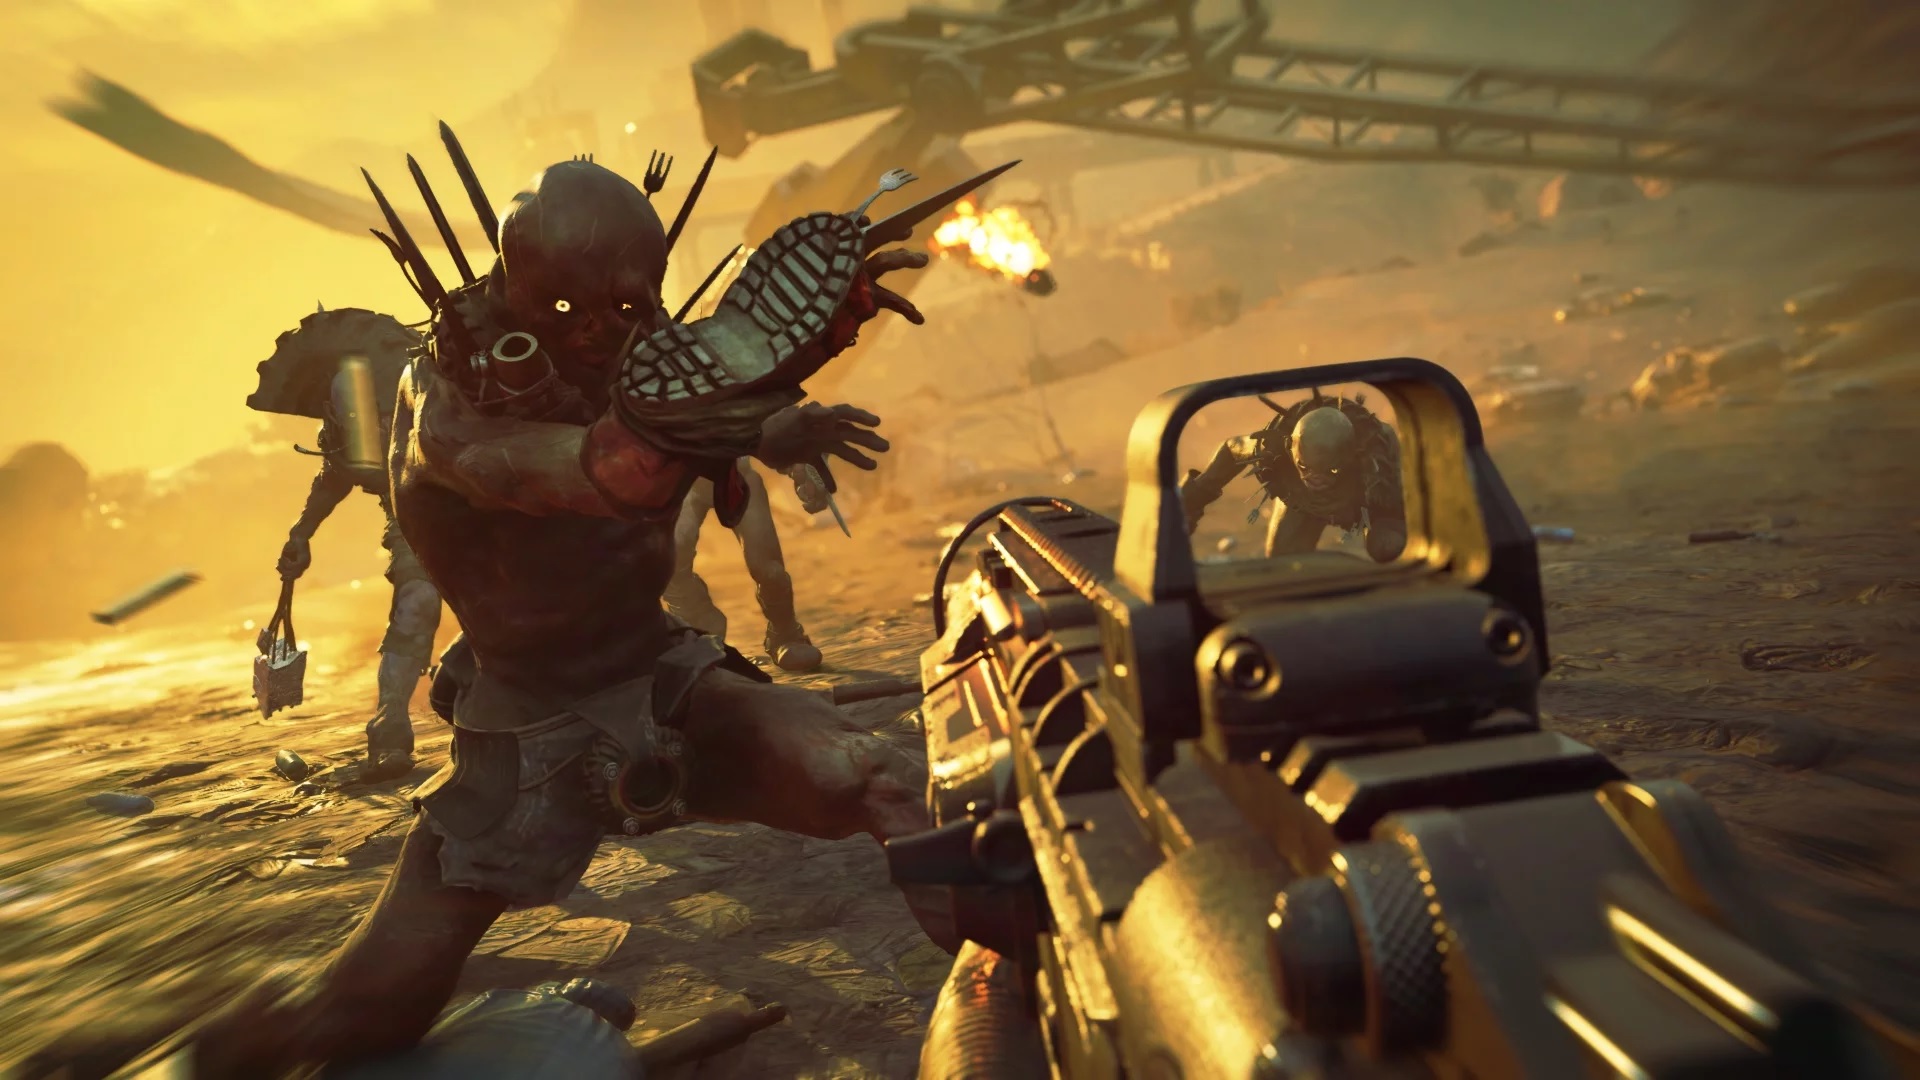 Insane Rage 2 Official Gameplay Trailer is unleashed